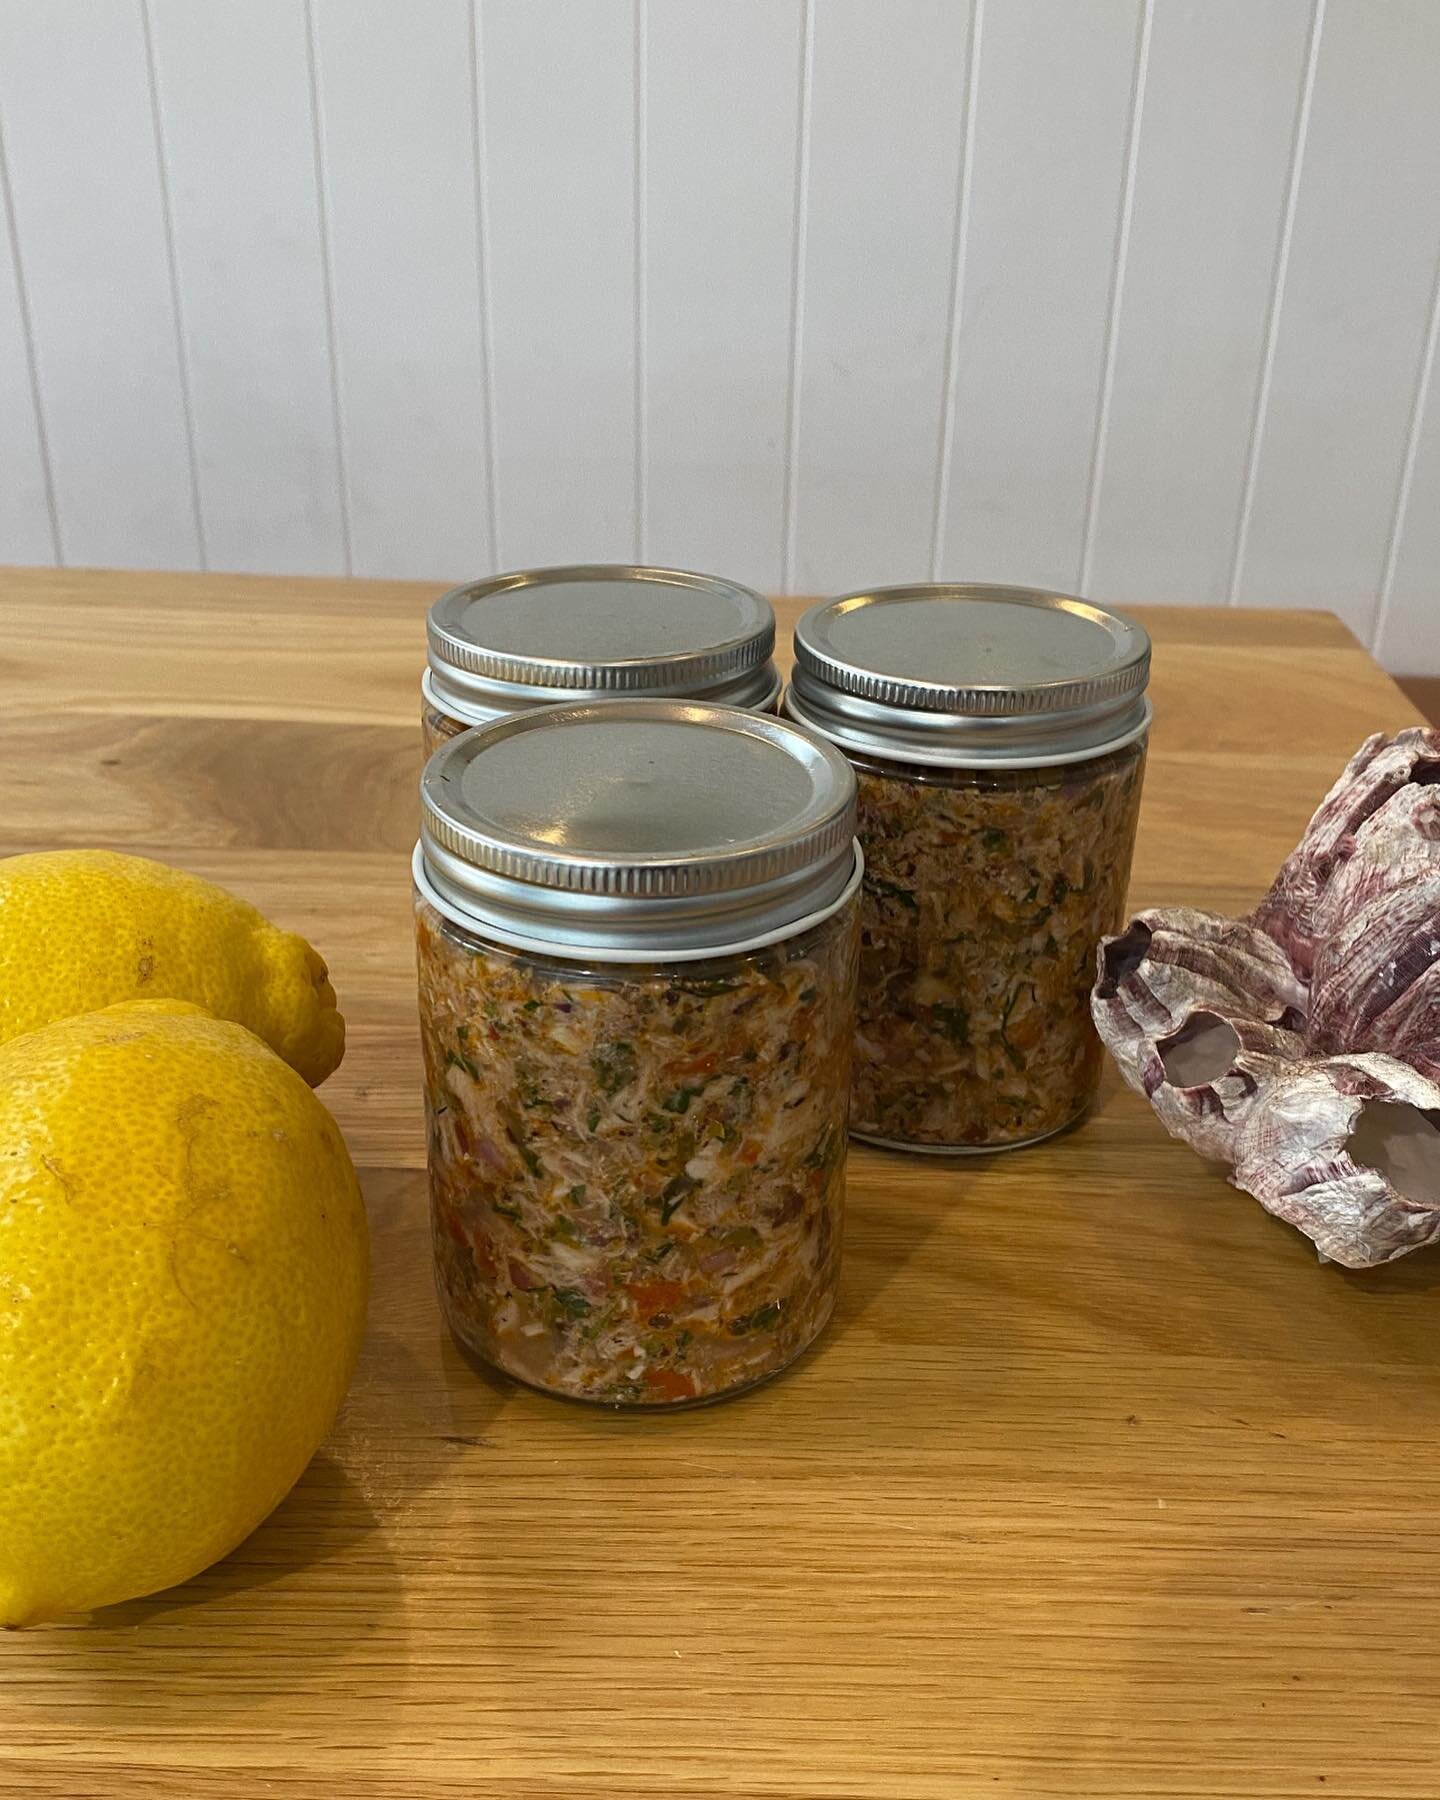 MEDITERRANEAN TUNA DIP
$12 in store now! Poached yellow fin tuna with chargrilled capsicum, capers, herbs and olive oil. Limited stock, come down quick!